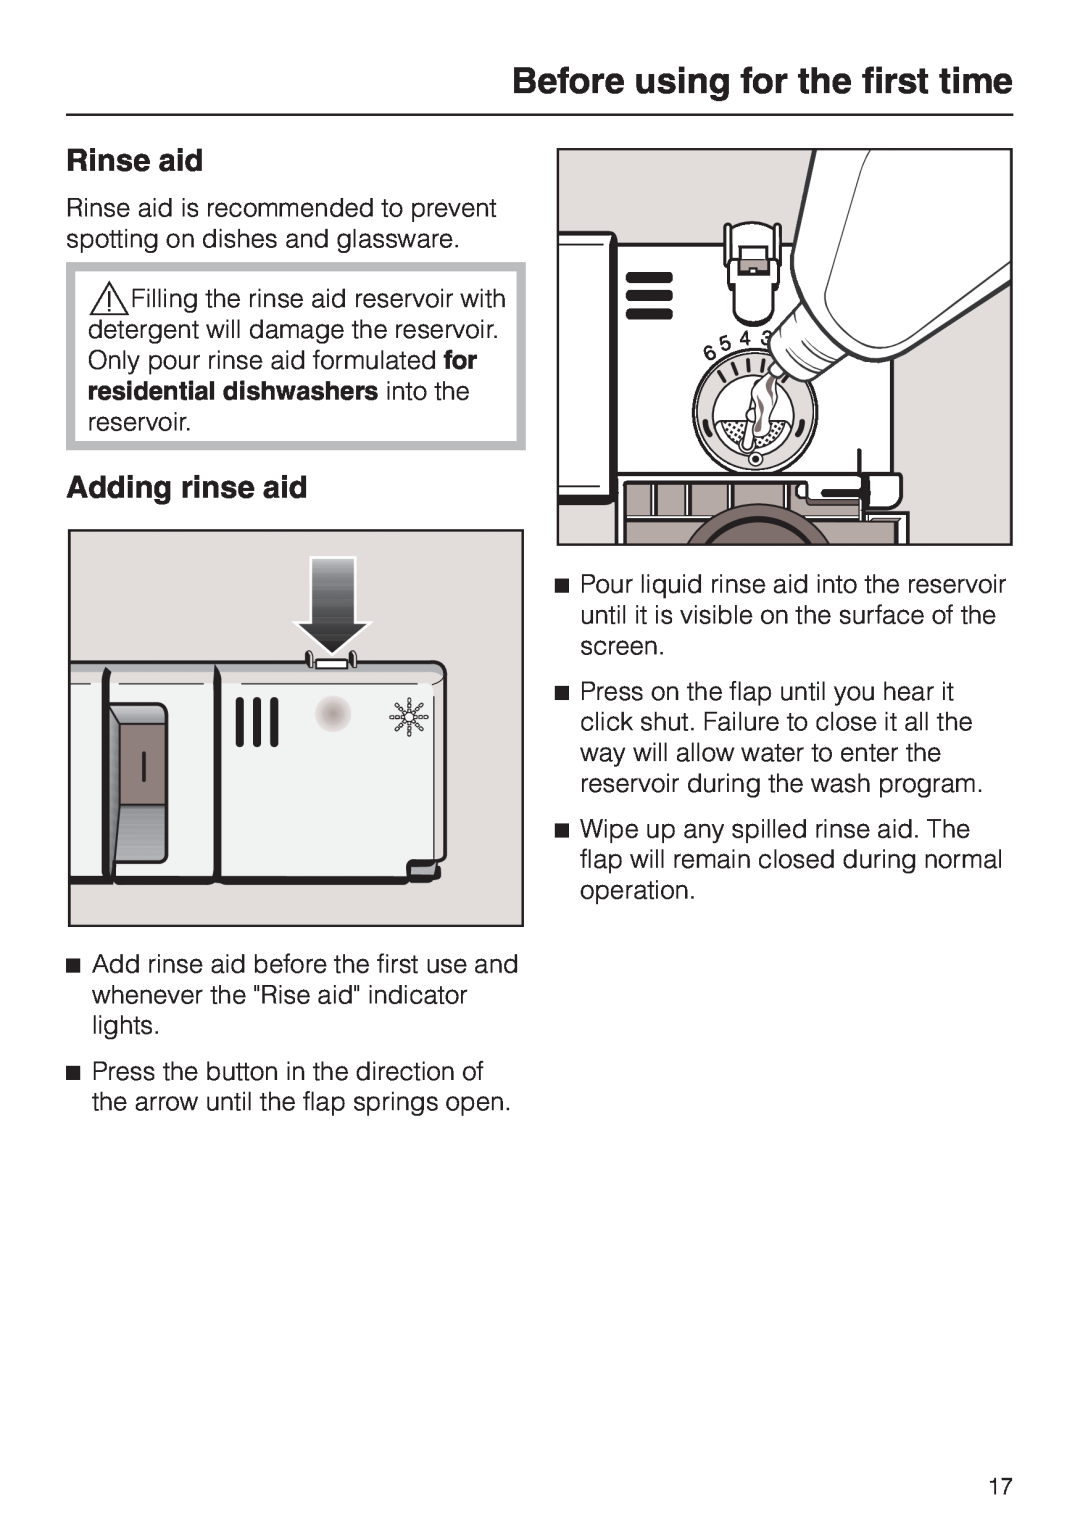 Miele HG01 operating instructions Rinse aid, Adding rinse aid, Before using for the first time 